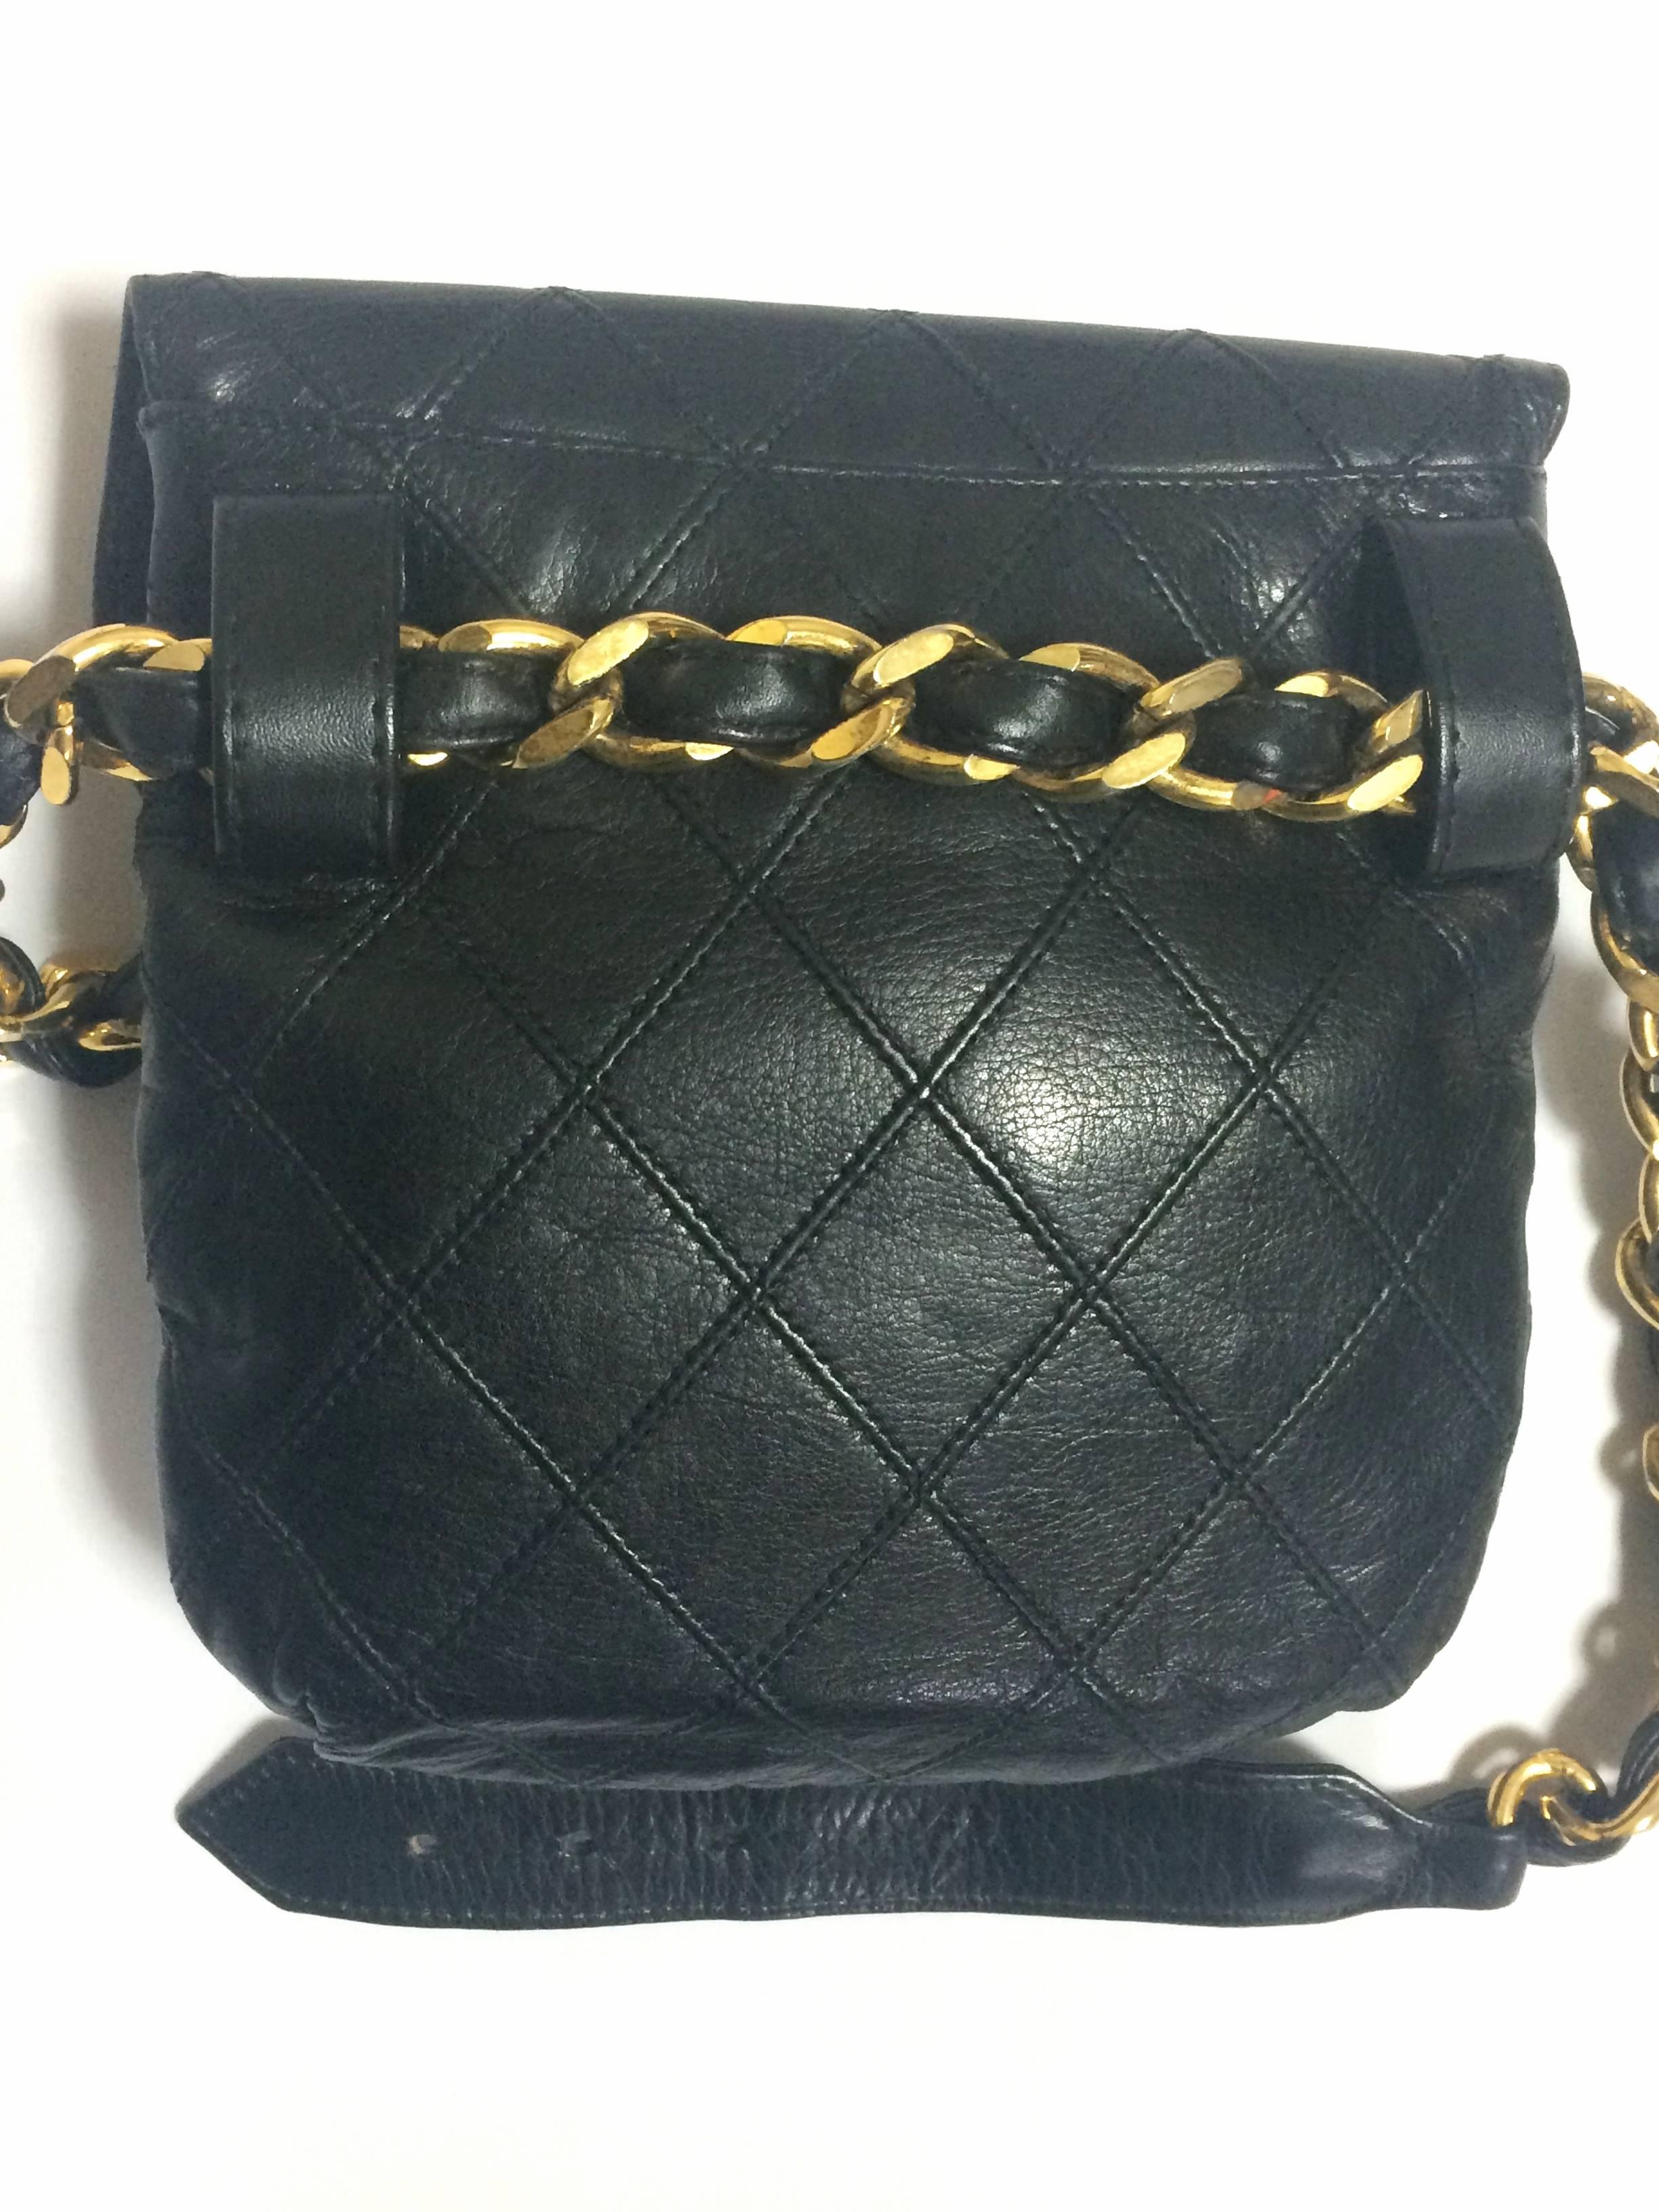 1990s. Vintage CHANEL black leather waist purse, fanny pack with golden thick chain belt and golden CC closure hock. 26", 26.5",27", and 27.5".

Featuring a gold tone CC turn lock closure, though it shows some colorfading. 
You